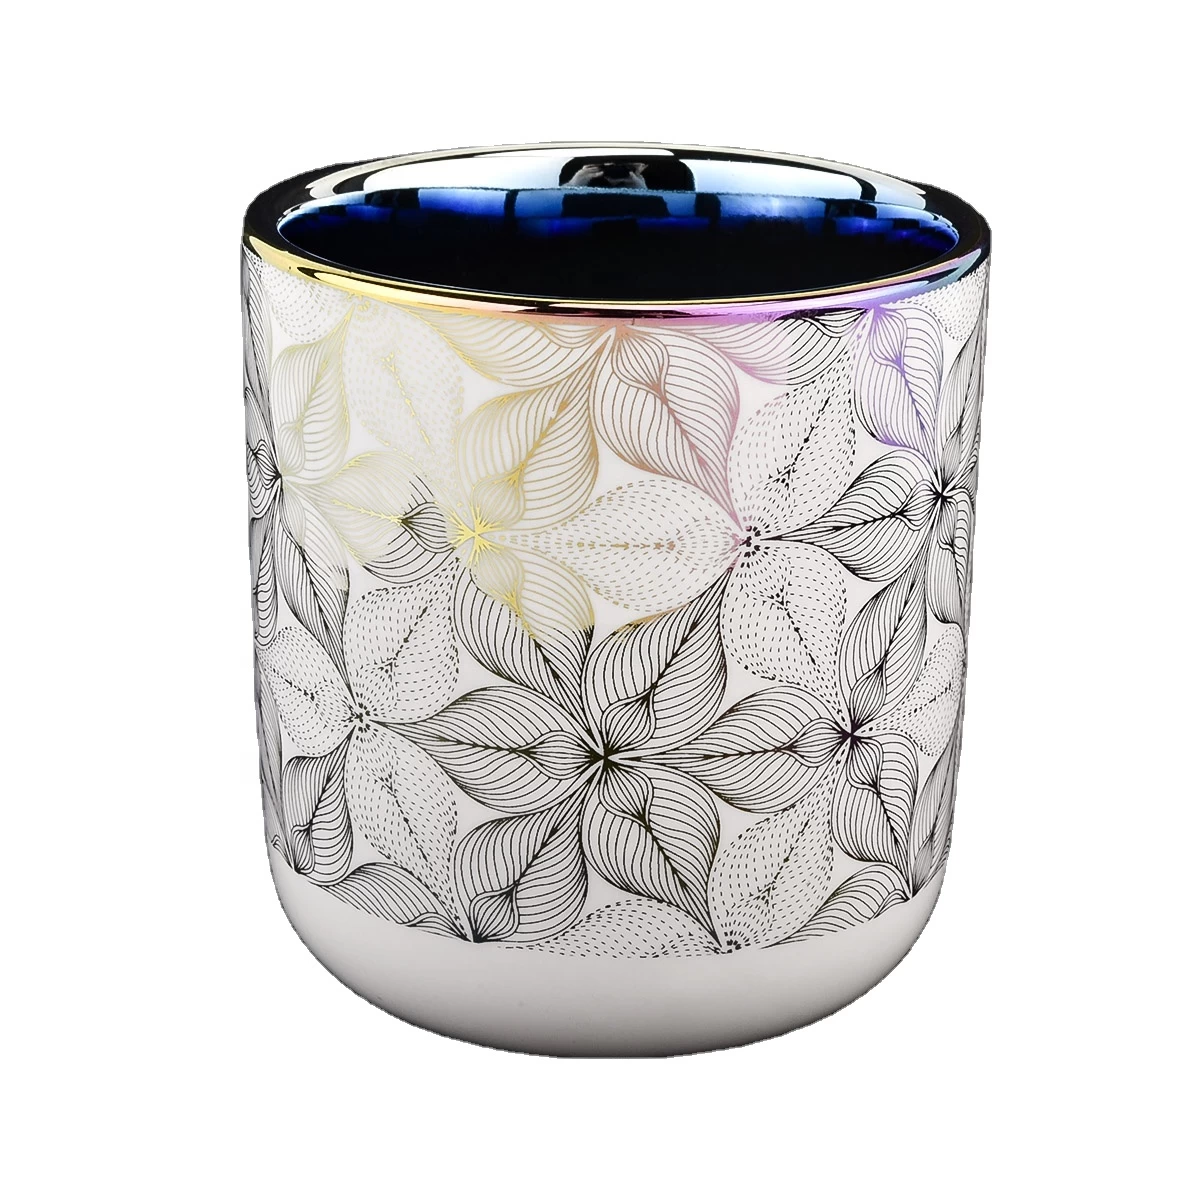 luxury ceramic candle jar with gold artwork